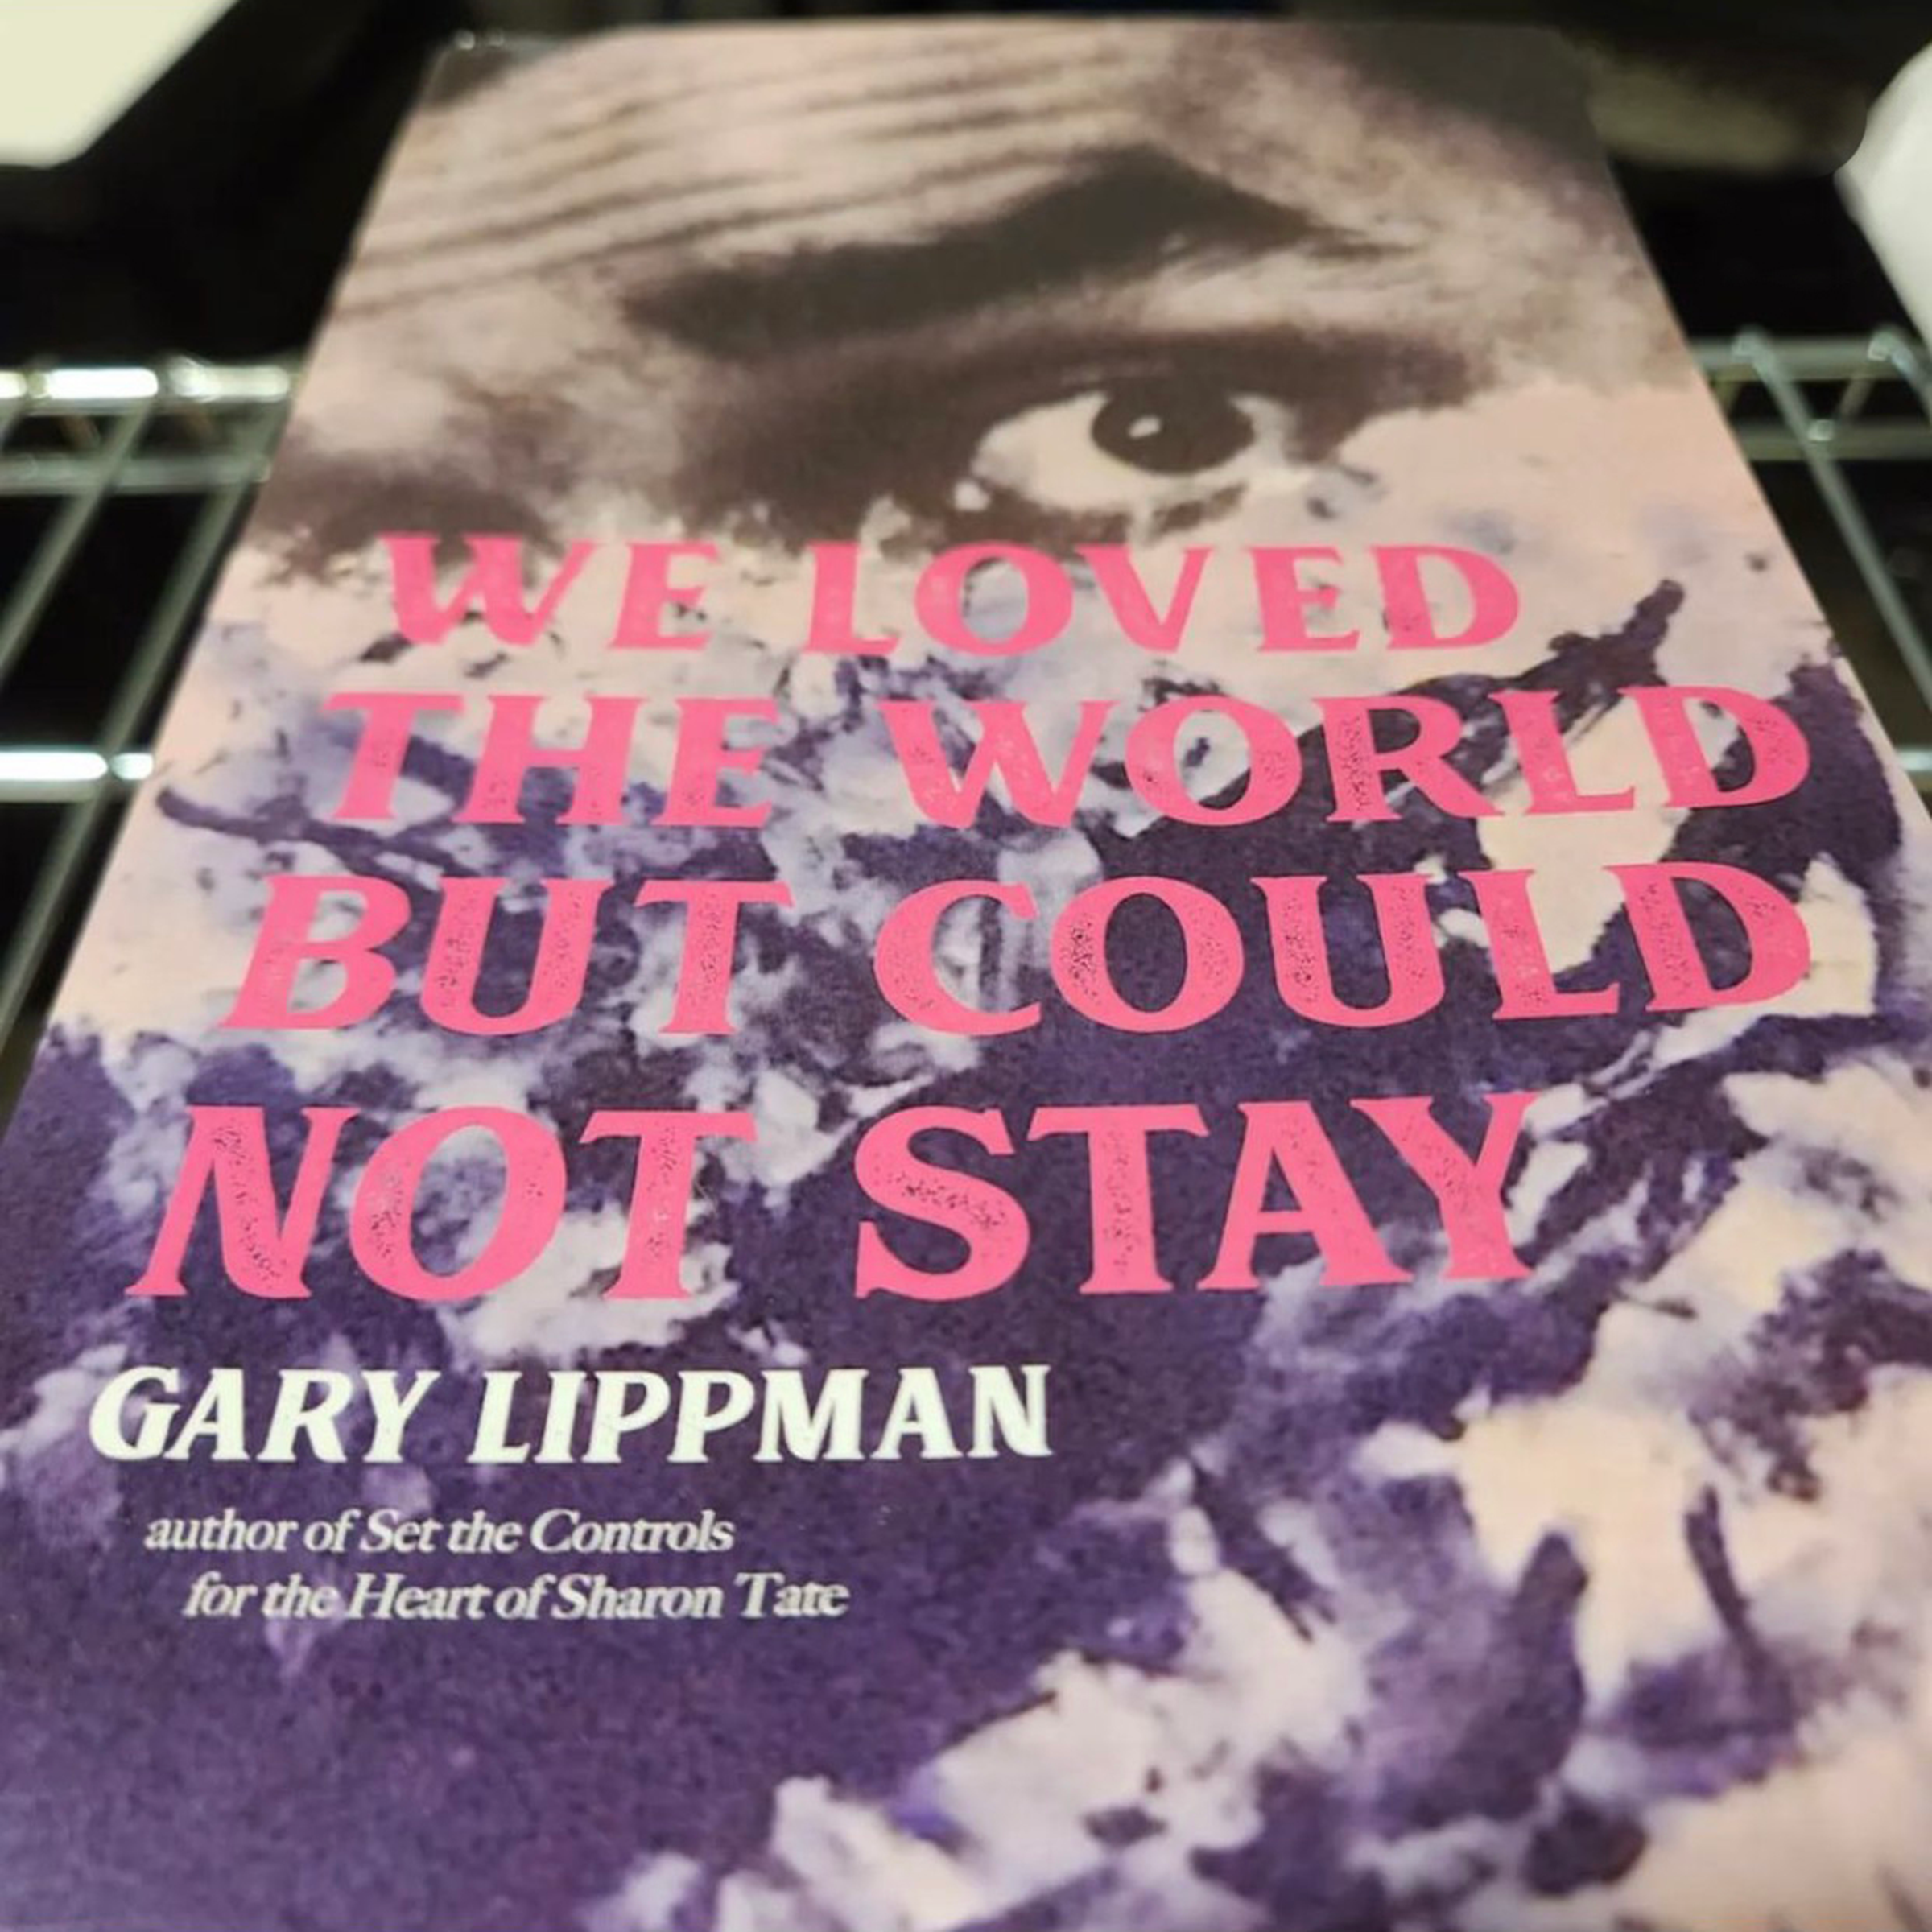 Gary Lippman - We Loved The World But Could Not Stay